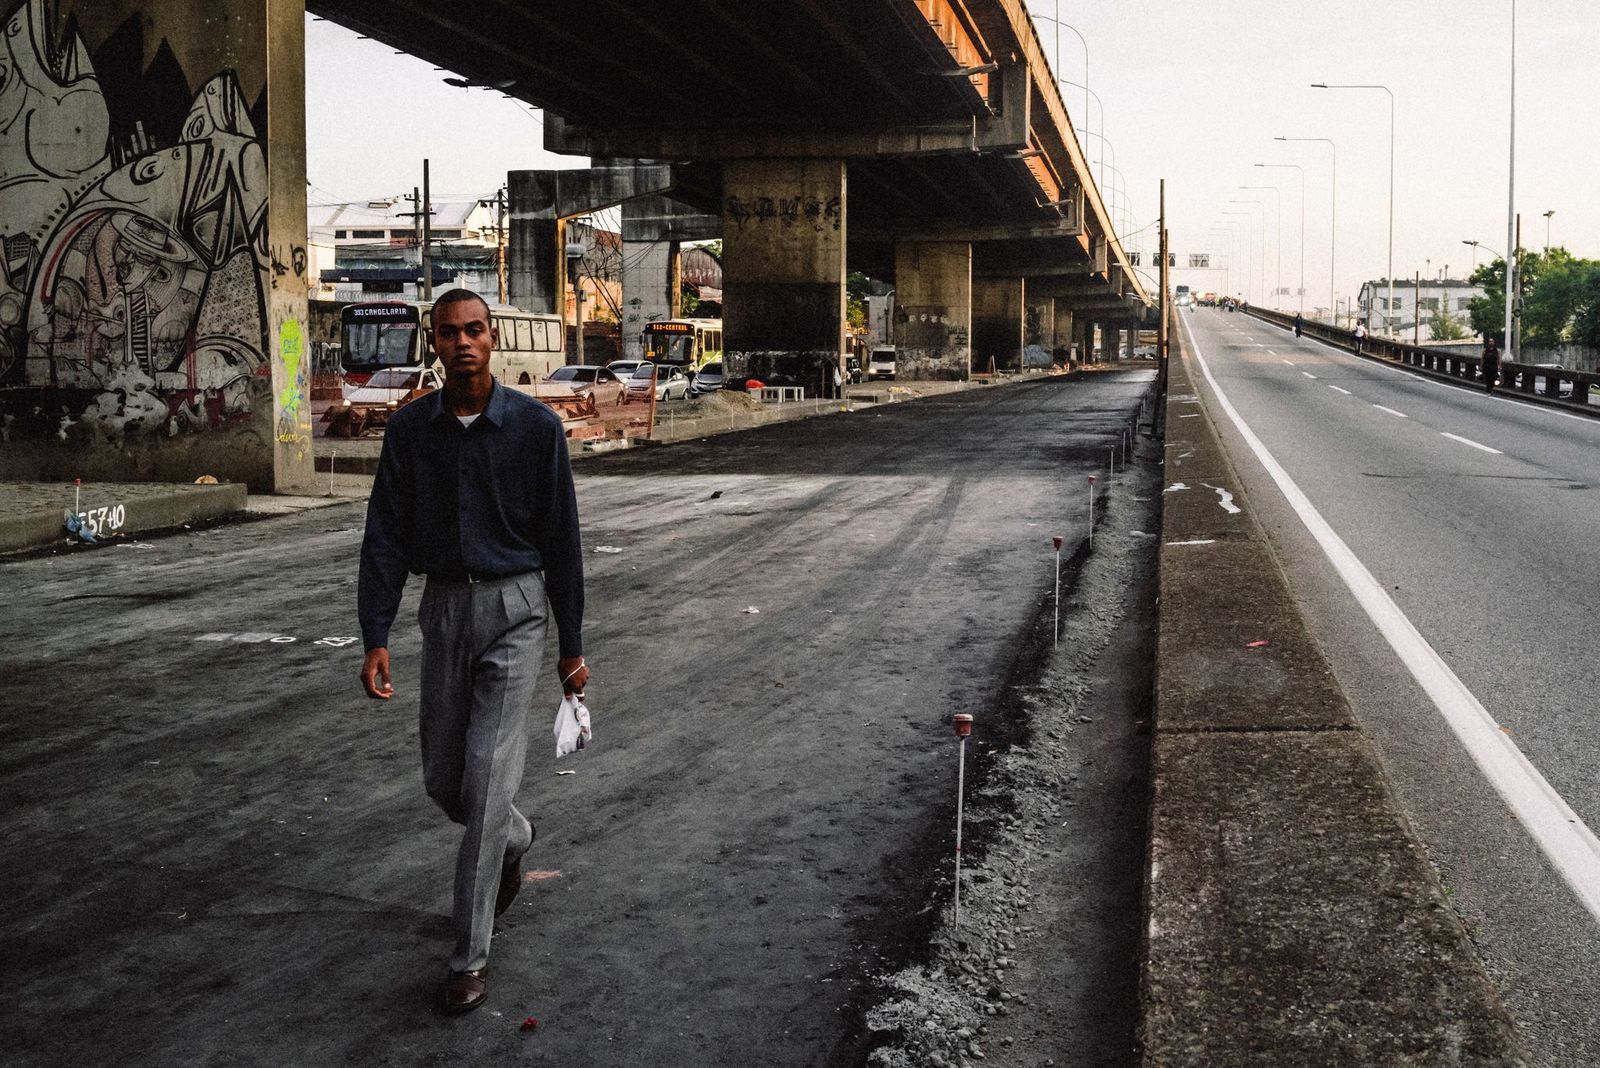 A Documentation of the Realities Inflicted by Inequality in Brazil